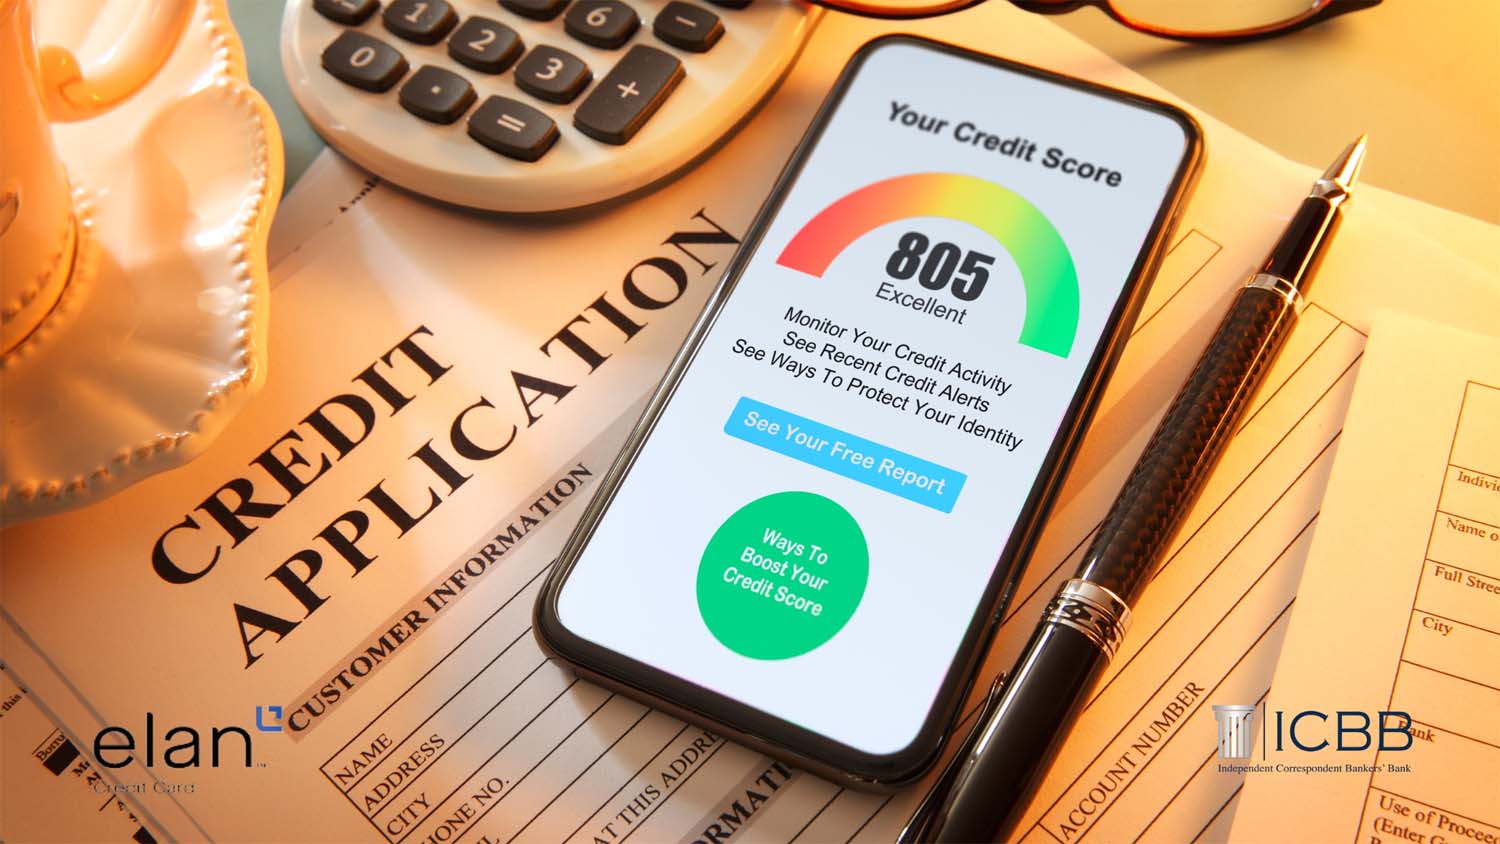 Think Beyond Credit Score: How Community Banks Can Grow and Engage Card Customers